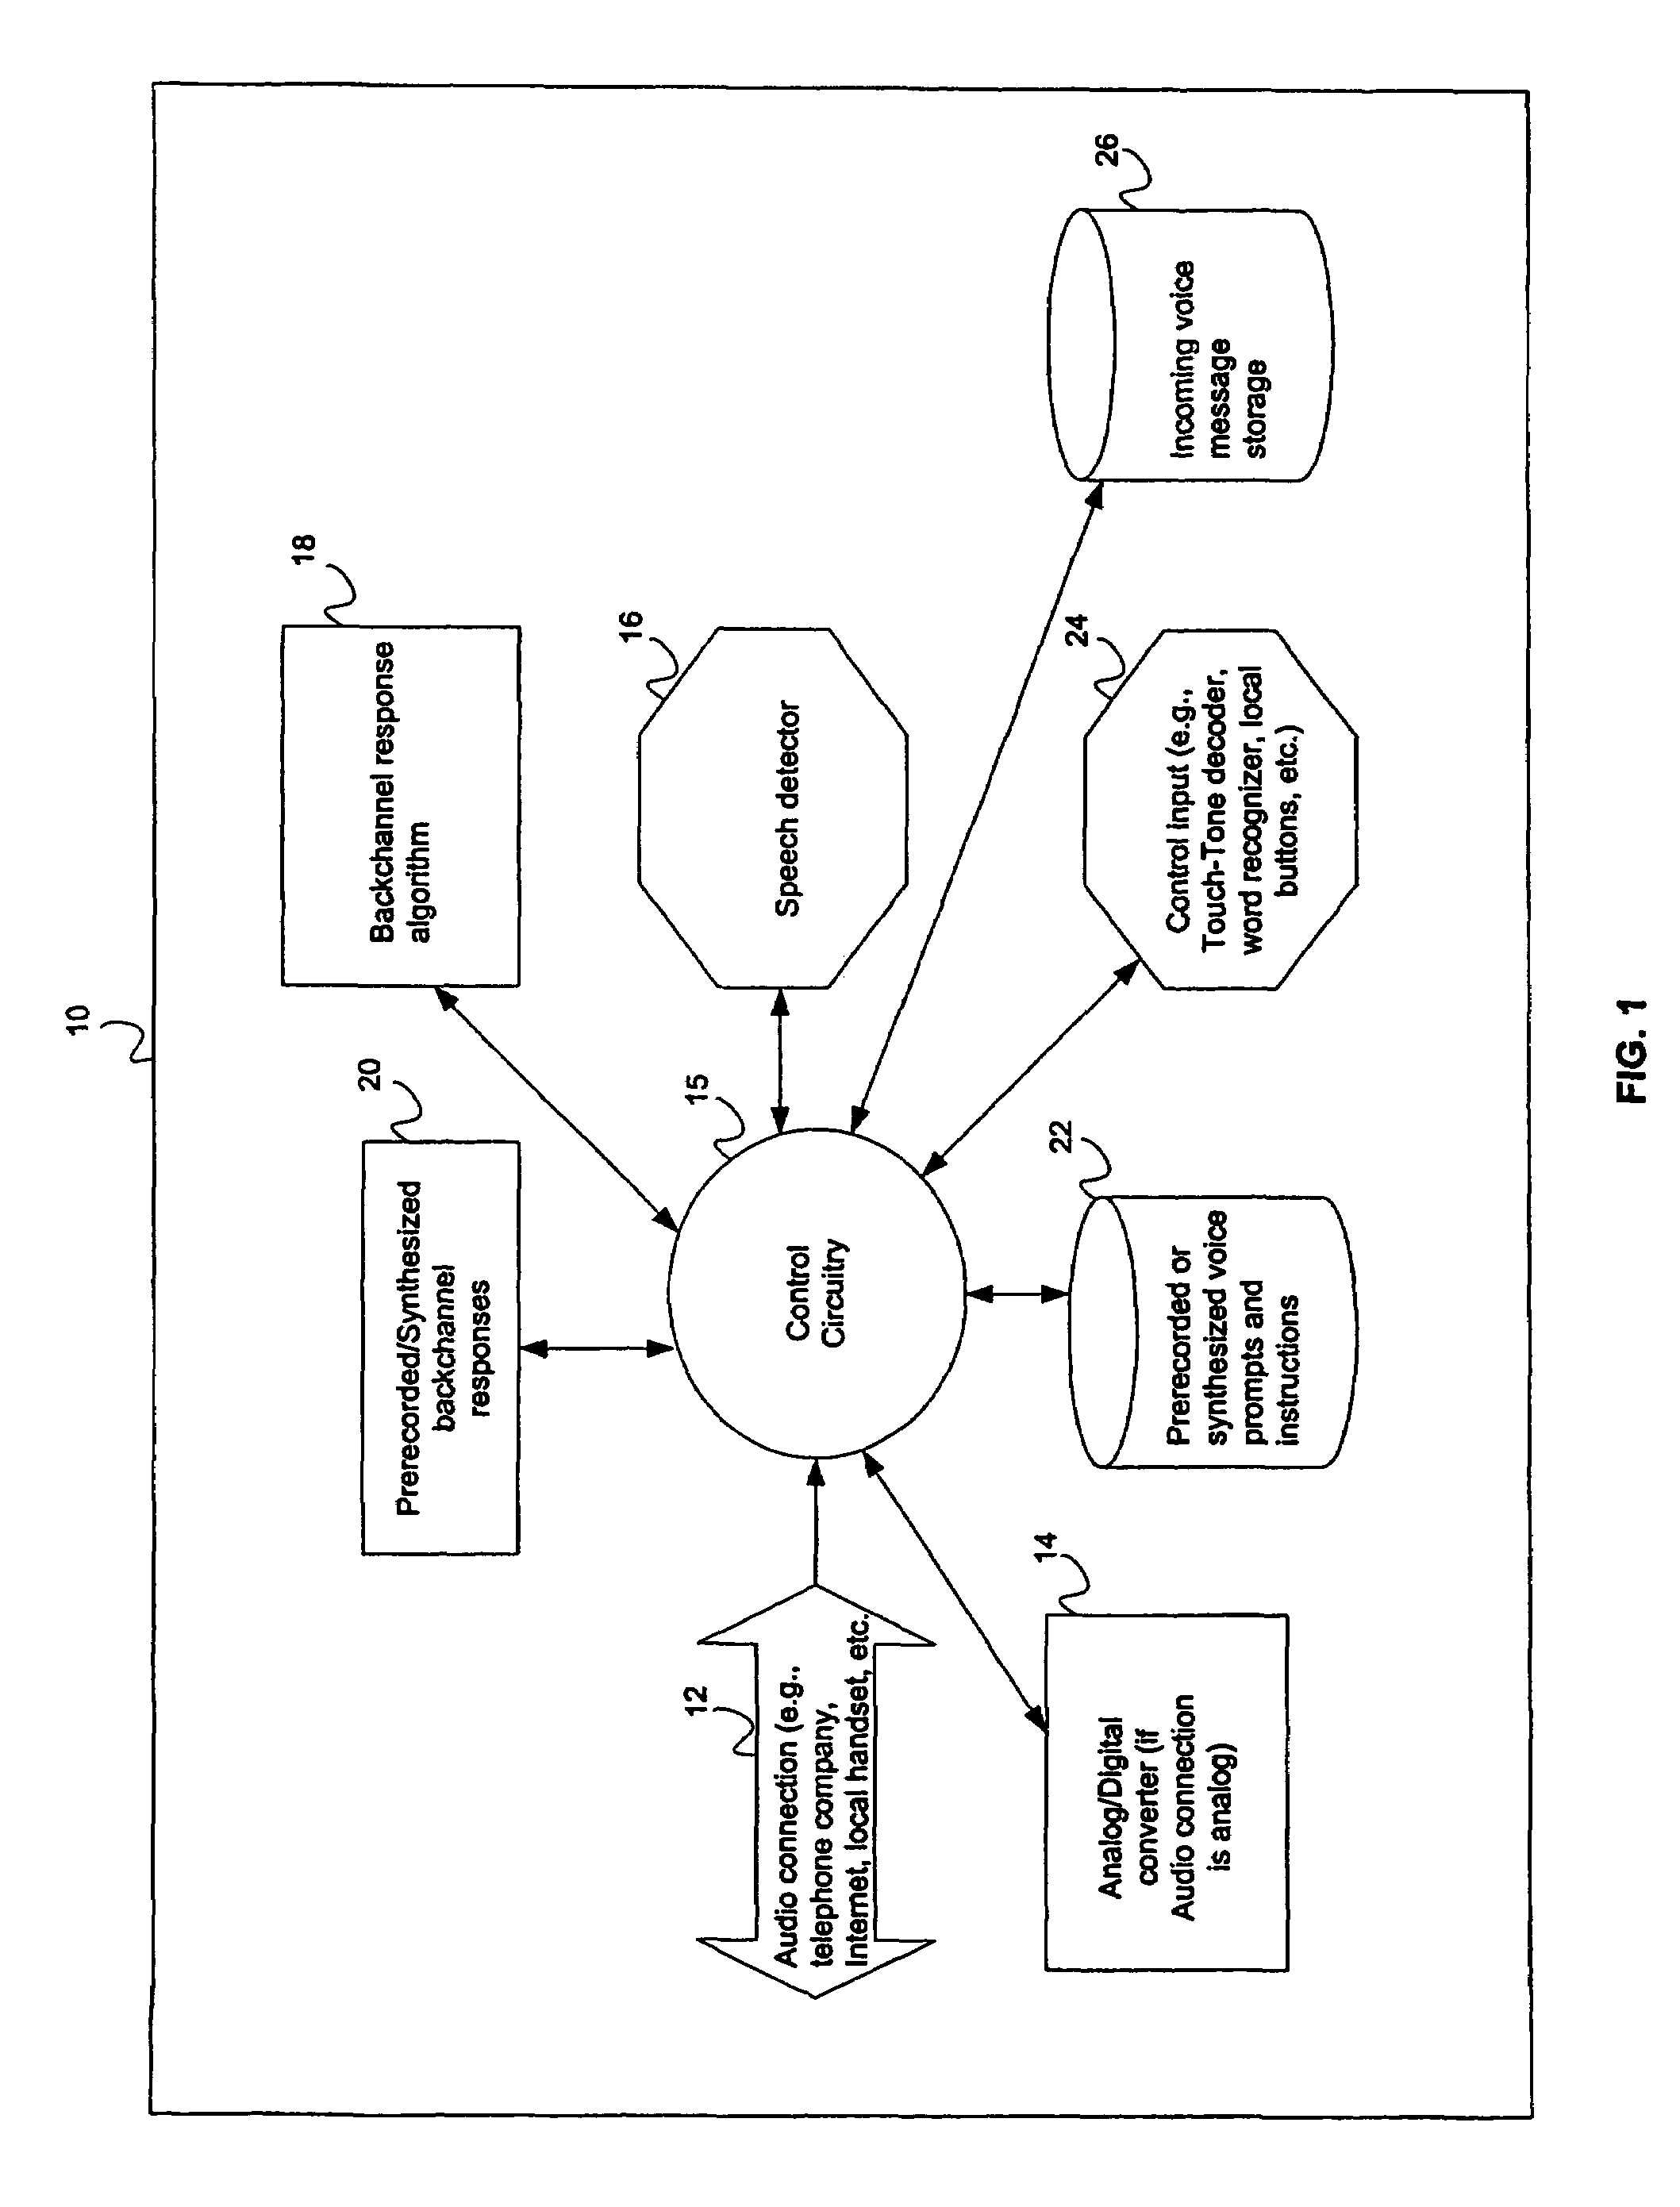 Method and system for providing automated audible backchannel responses